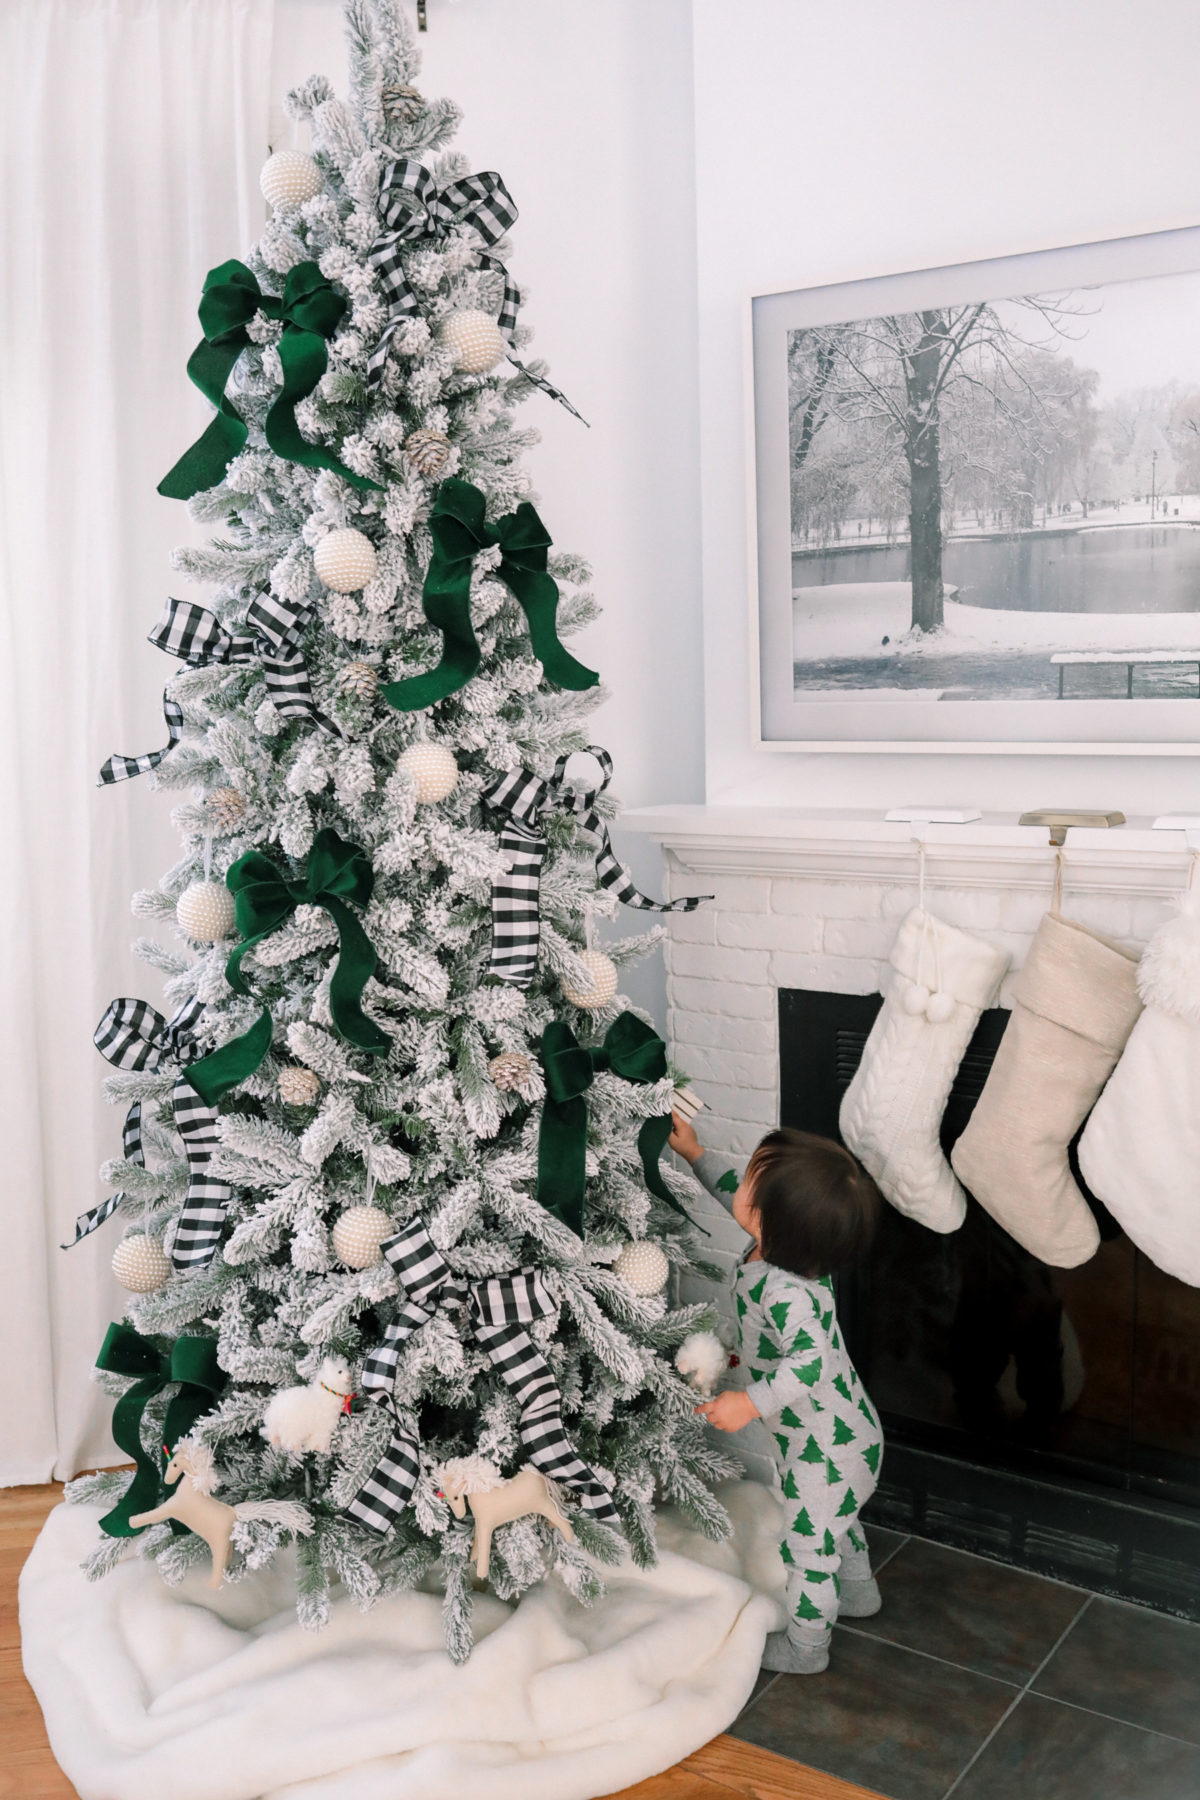 POLLYANNA GUIDE TO DECORATING CHRISTMAS TREE trims